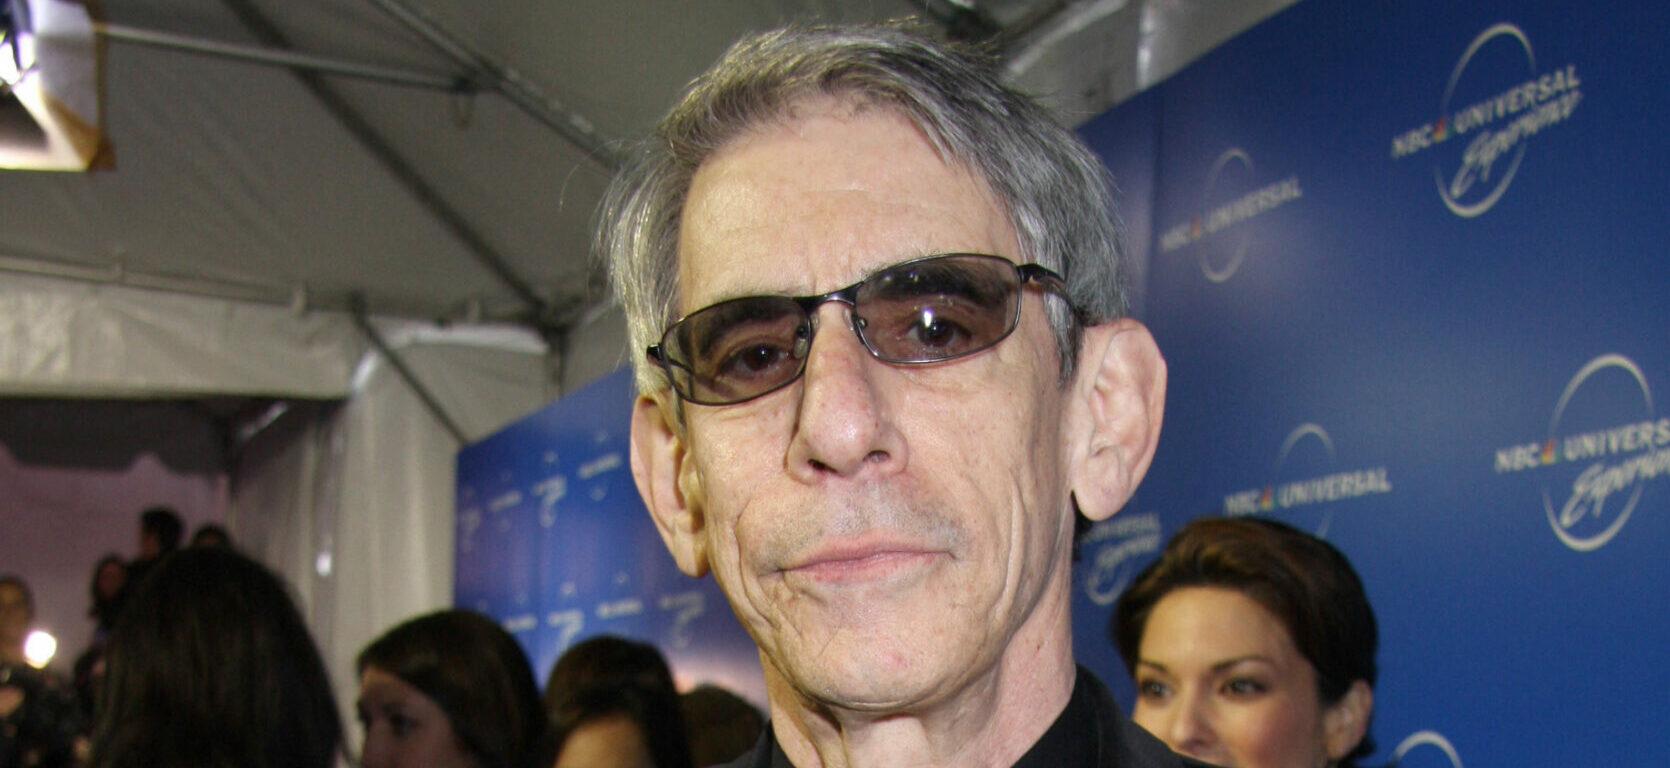 Ice-T And More ‘Law & Order’ Co-Stars Speak On Richard Belzer’s Death: ‘I’ll Miss You Homie’